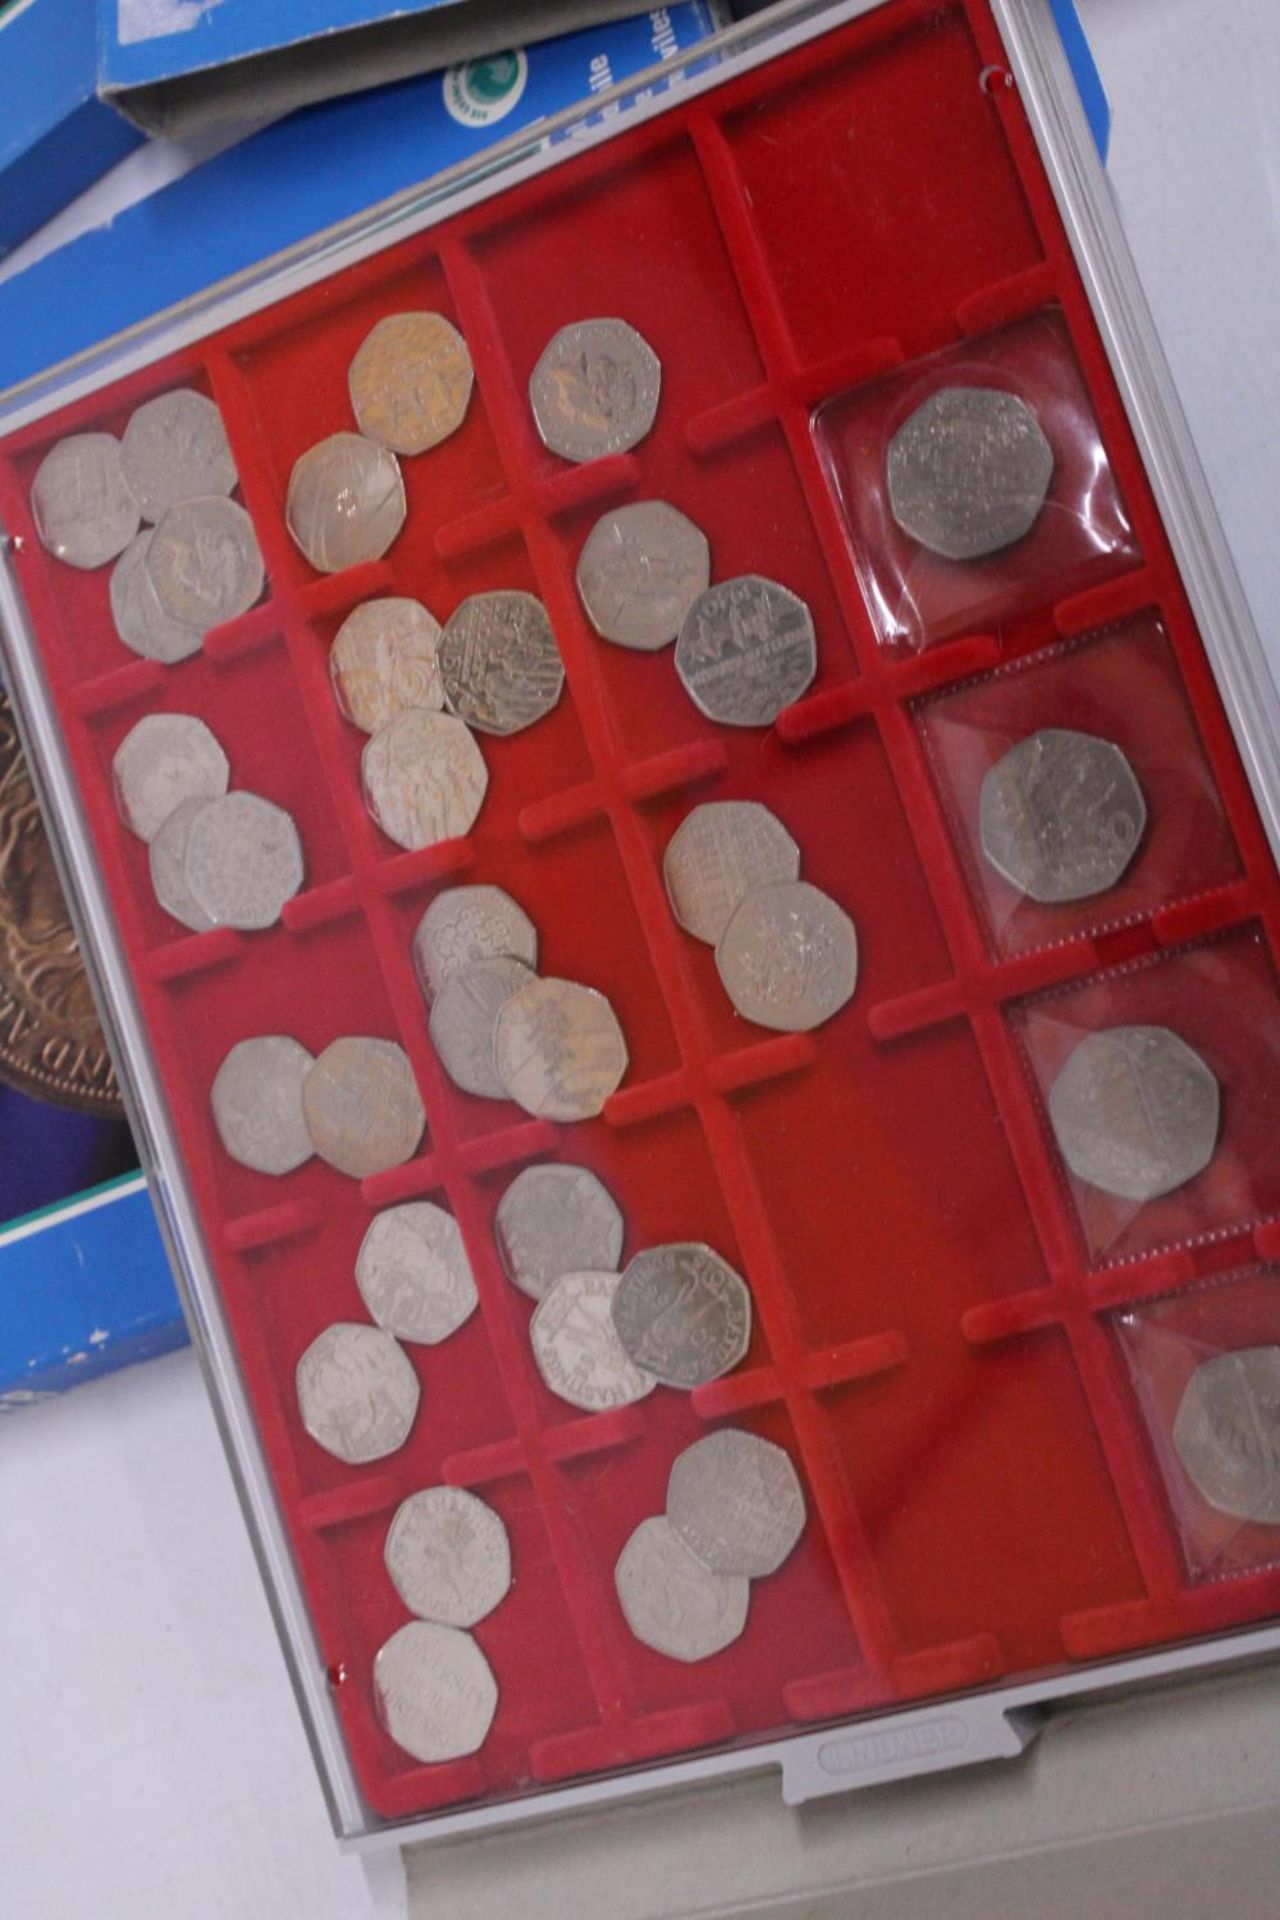 UK 50P COIN COLLECTION ARRANGED IN THREE LINDNER TRAYS 68 IN TOTAL ,UNCHECKED, CAREFUL EXAMINATION - Image 5 of 7